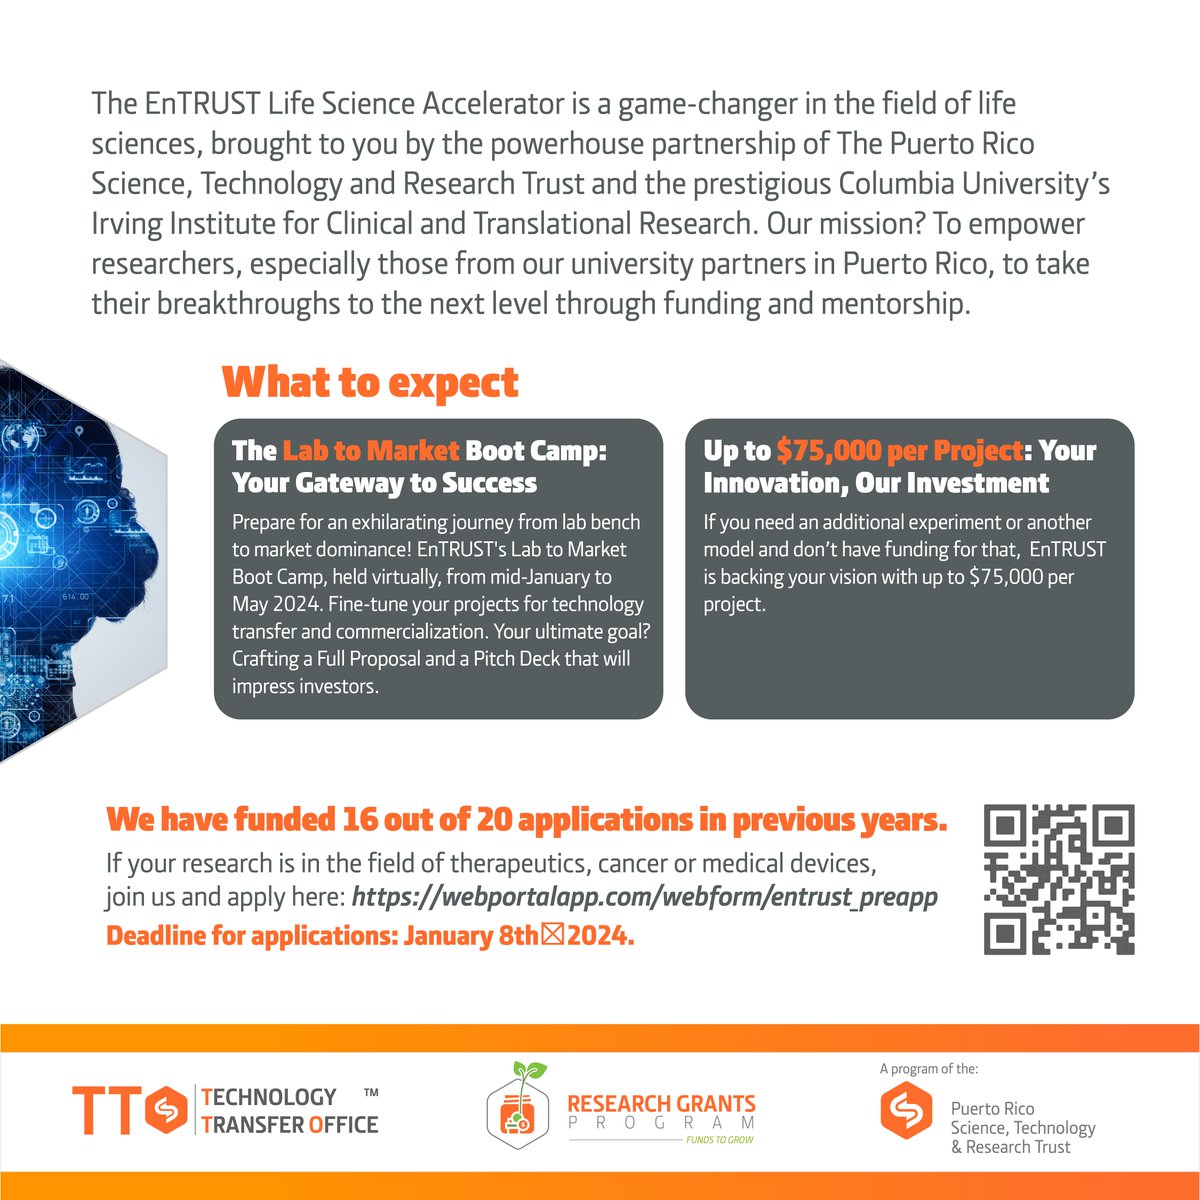 💡Need funding to take your project to the next level? EnTRUST has your back with up to $75,000 per project! Apply now: webportalapp.com/webform/entrus… Deadline: January 8th, 2024🌟 In collab with @prsciencetrust1 and Irving Institute for Clinical and Translational Research @ColumbiaMed